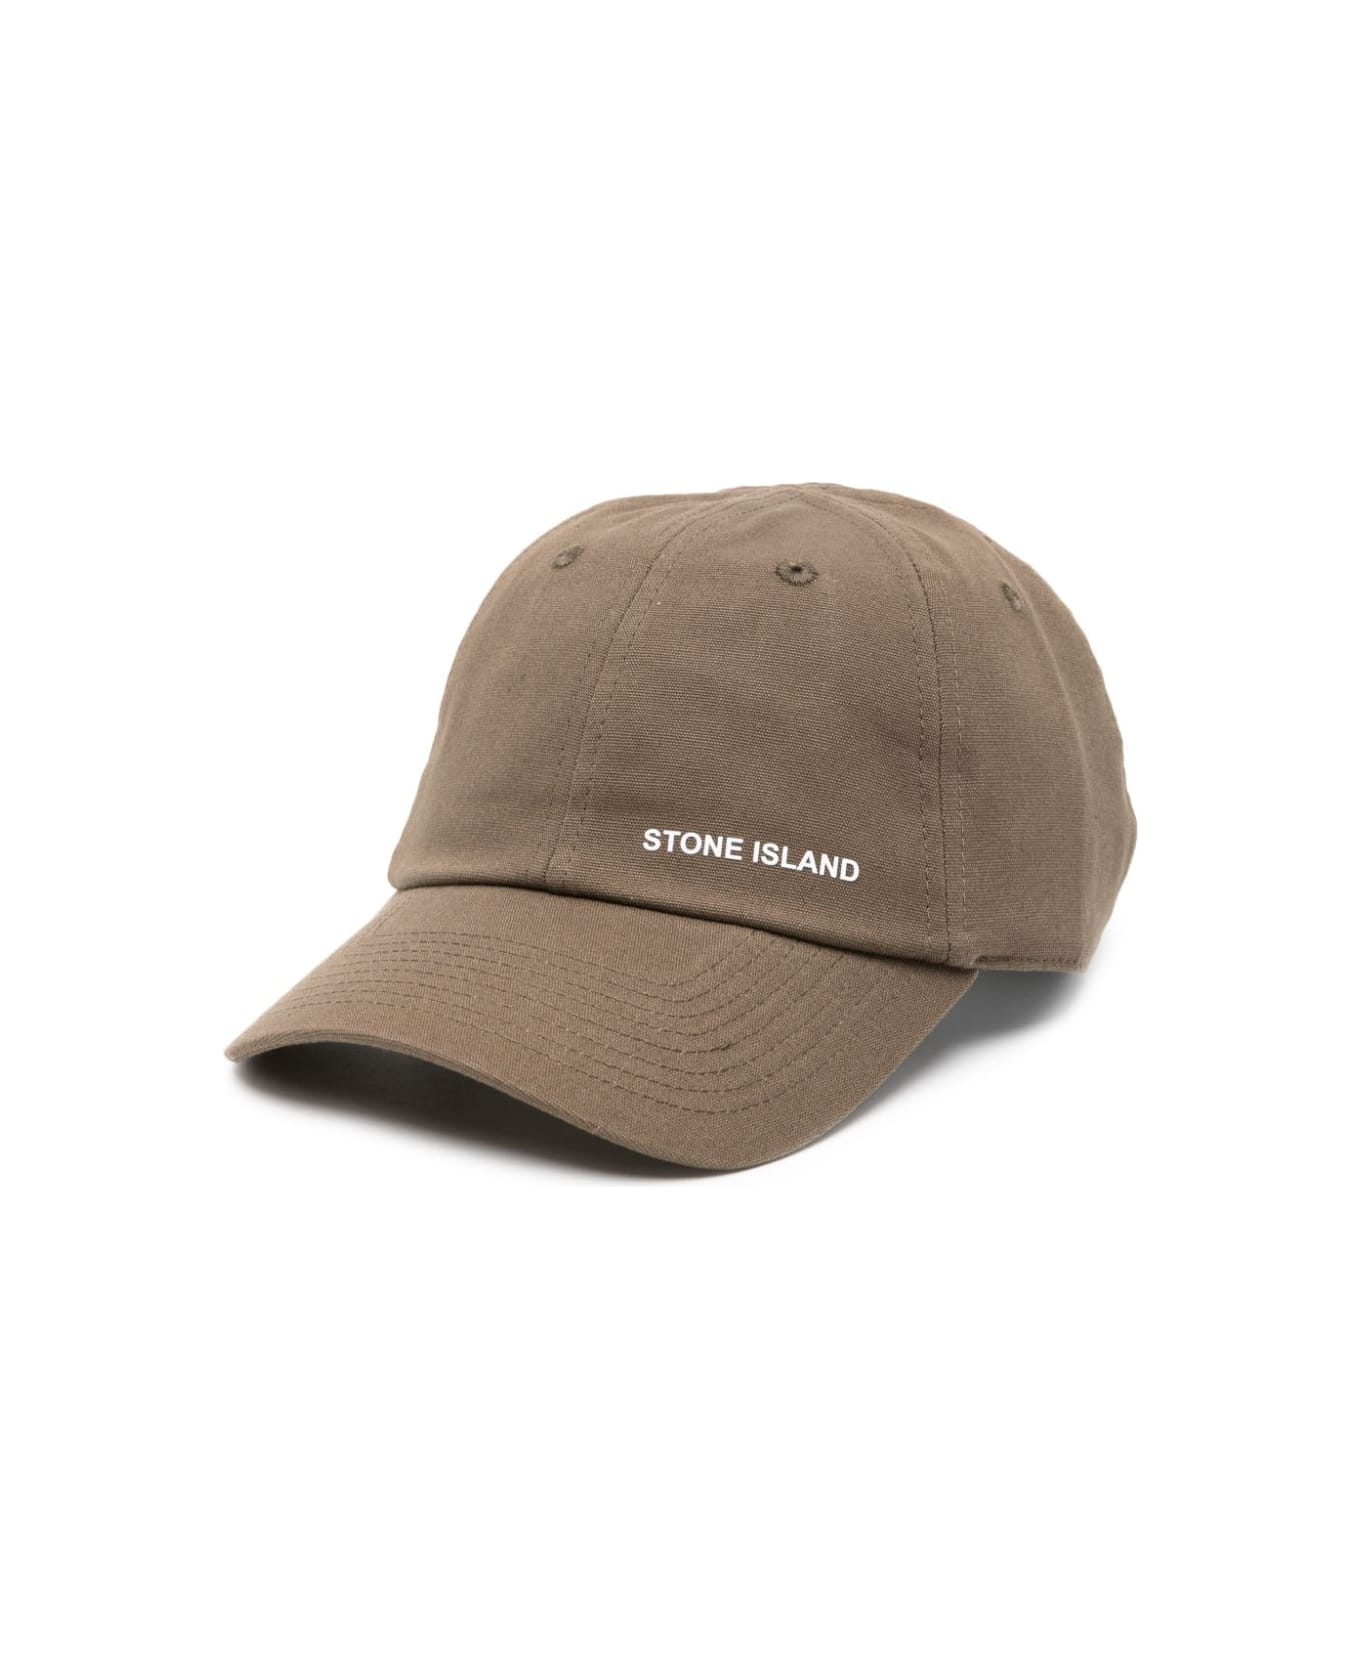 Stone Island Military Green Baseball Hat With Embossed Print - Brown